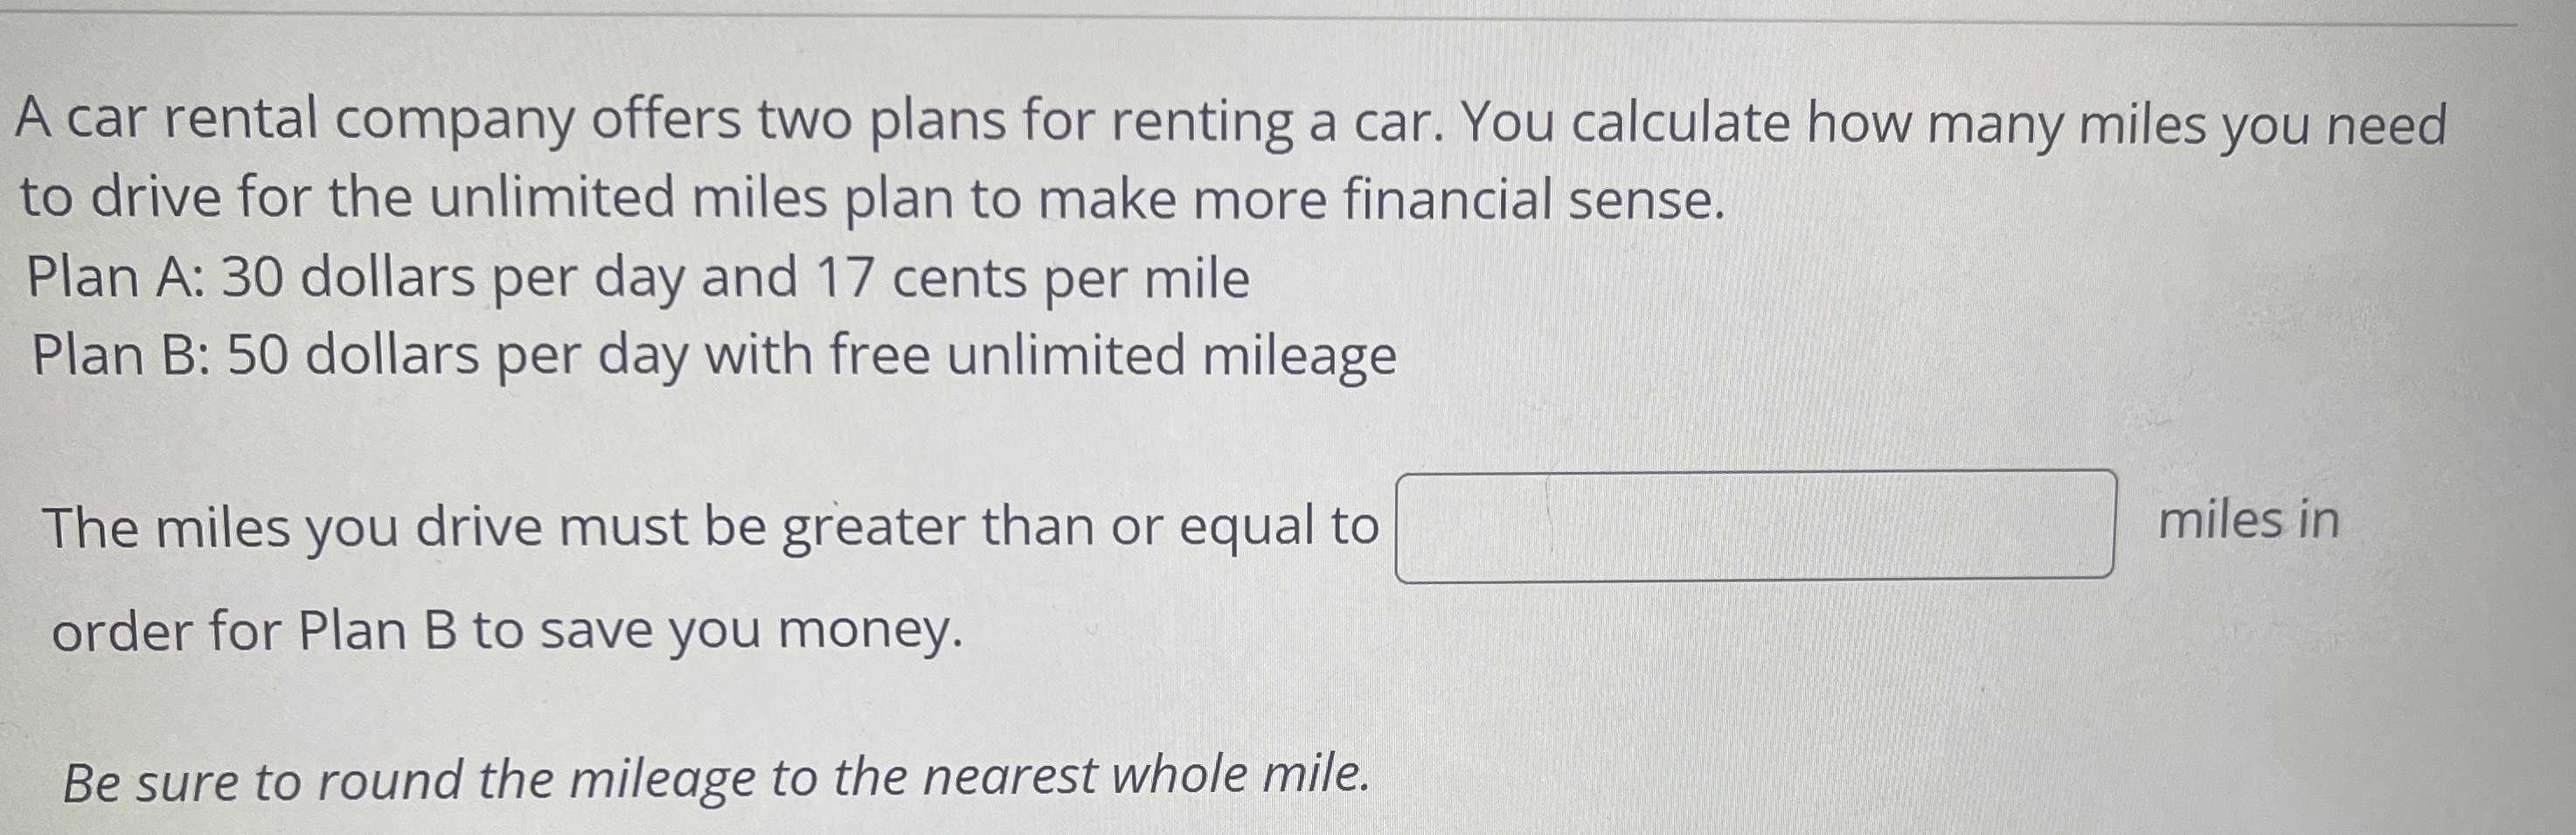 A car rental company offers two plans for renting ...